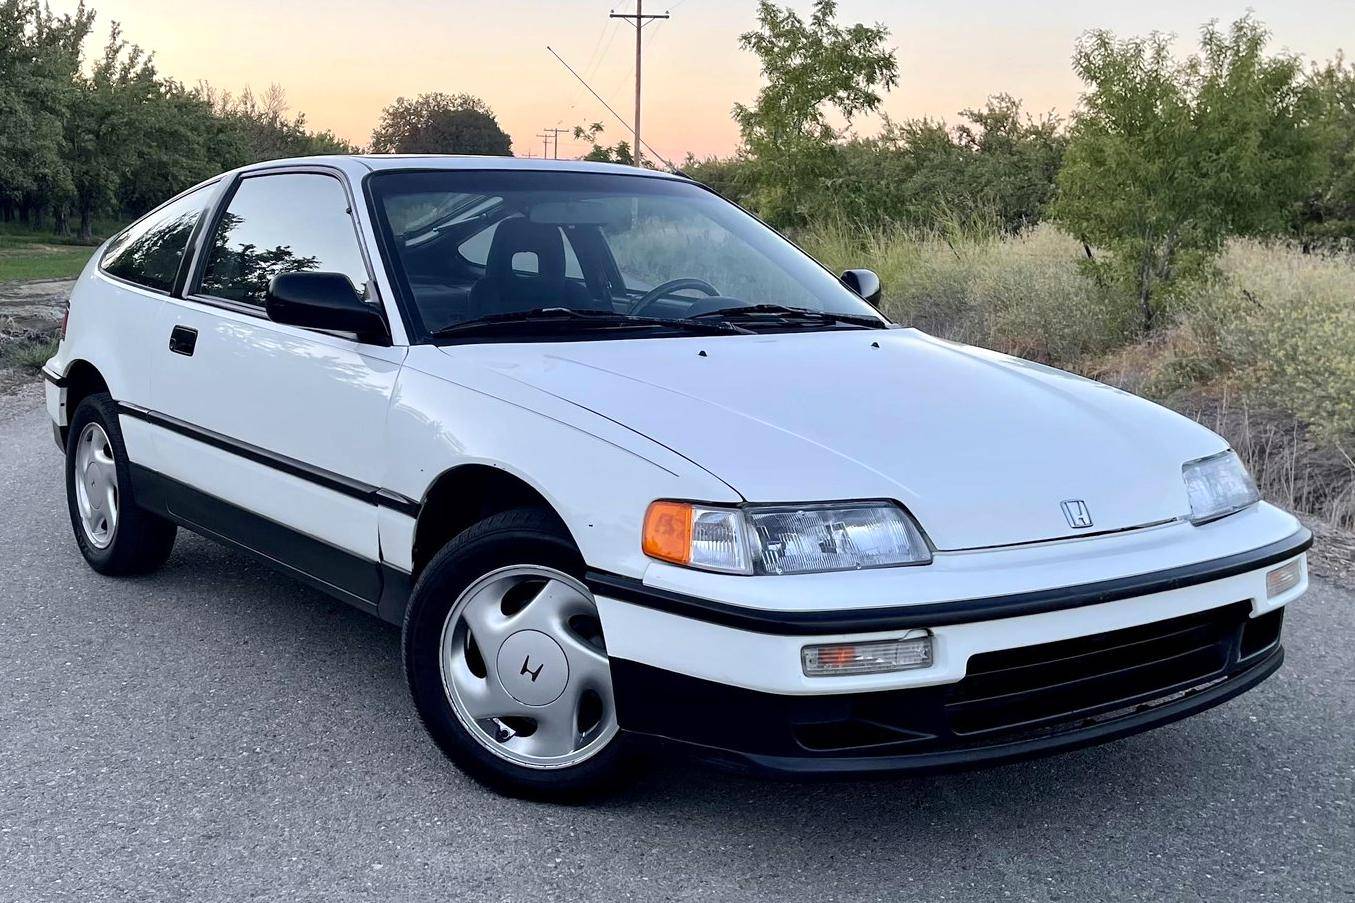 crx for sale near me